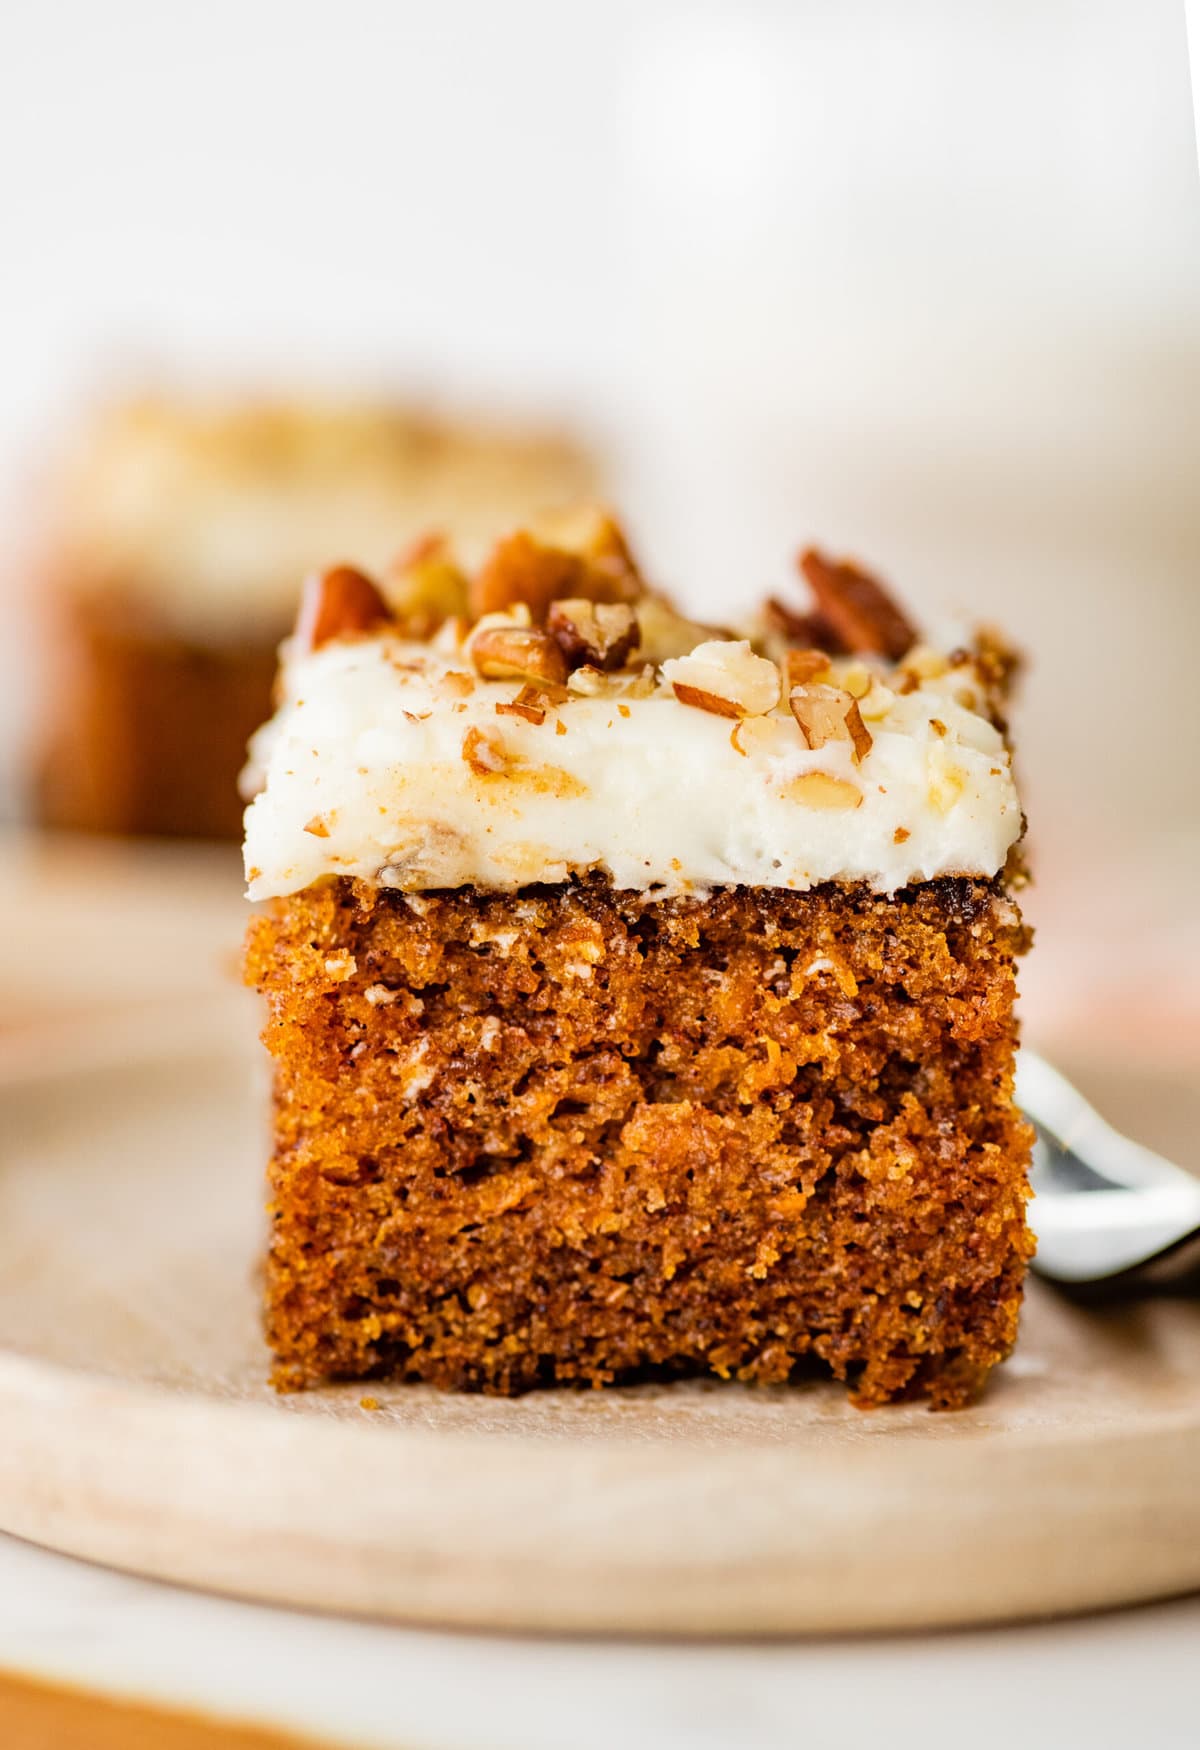 a square slice of carrot cake with cream cheese frosting on a plate with a fork.